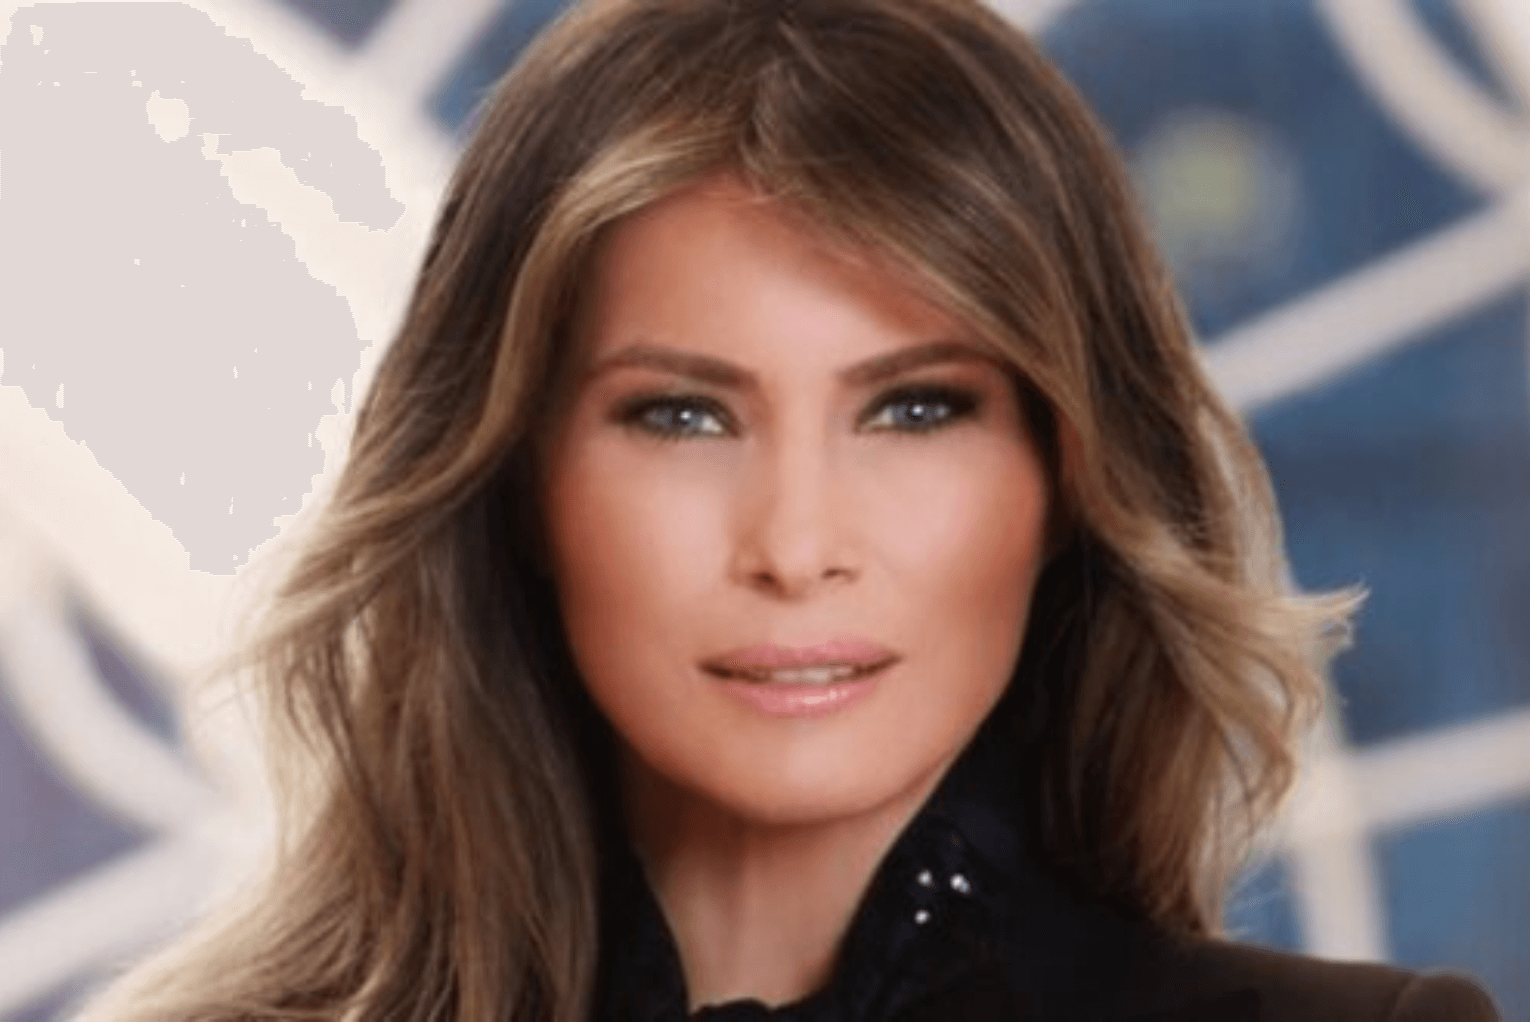 Melania Trump comments on the assassination attempt: “Love is everything” –